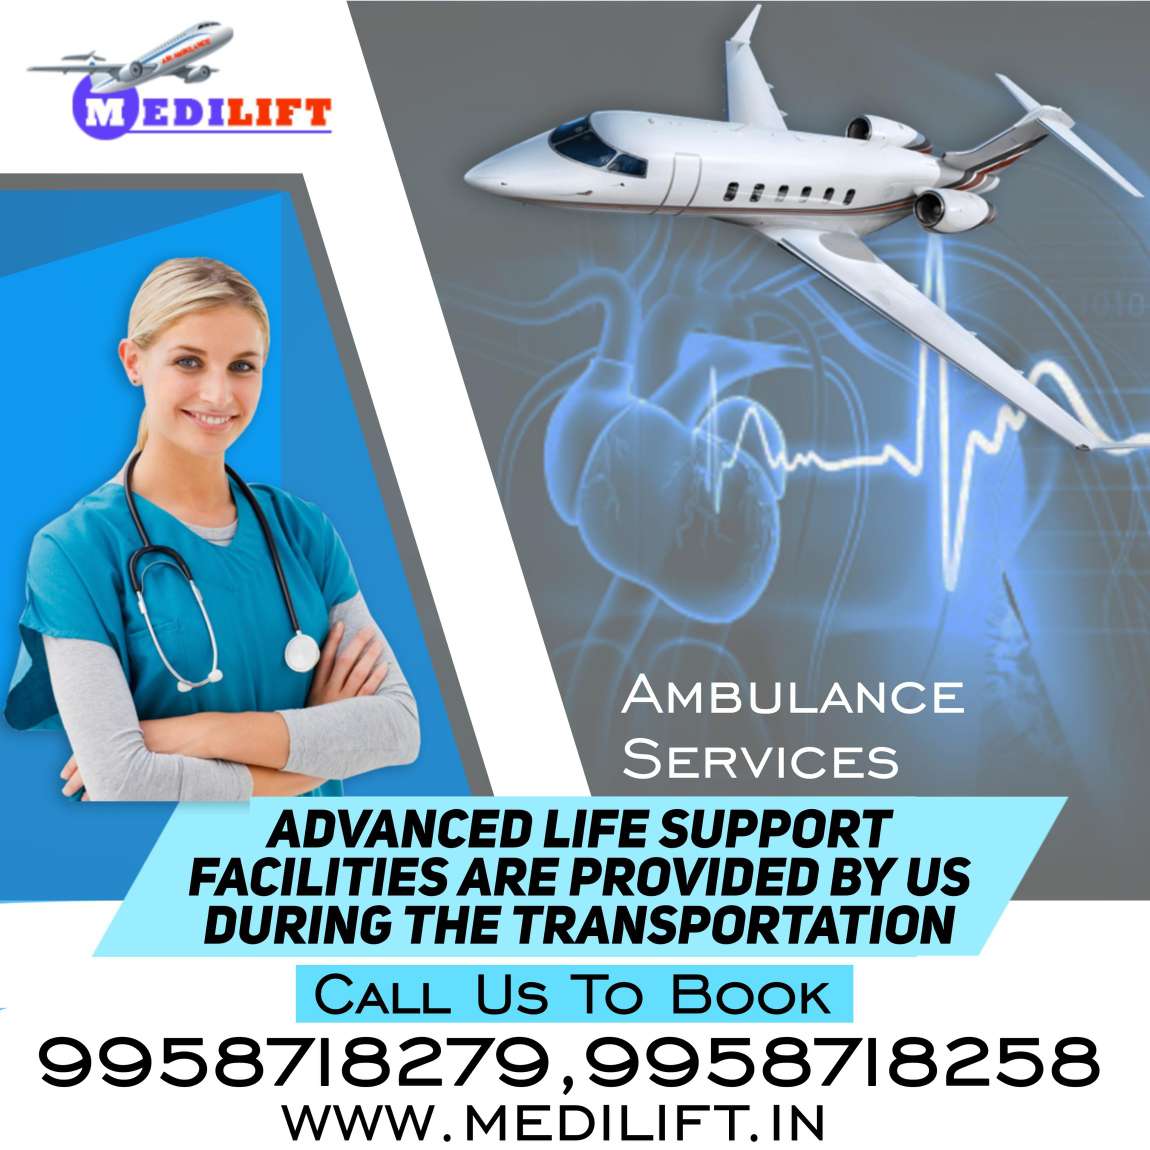 Acquire Top-Rated ALS Based Air Ambulance Service in Delhi with ICU Setup - photo